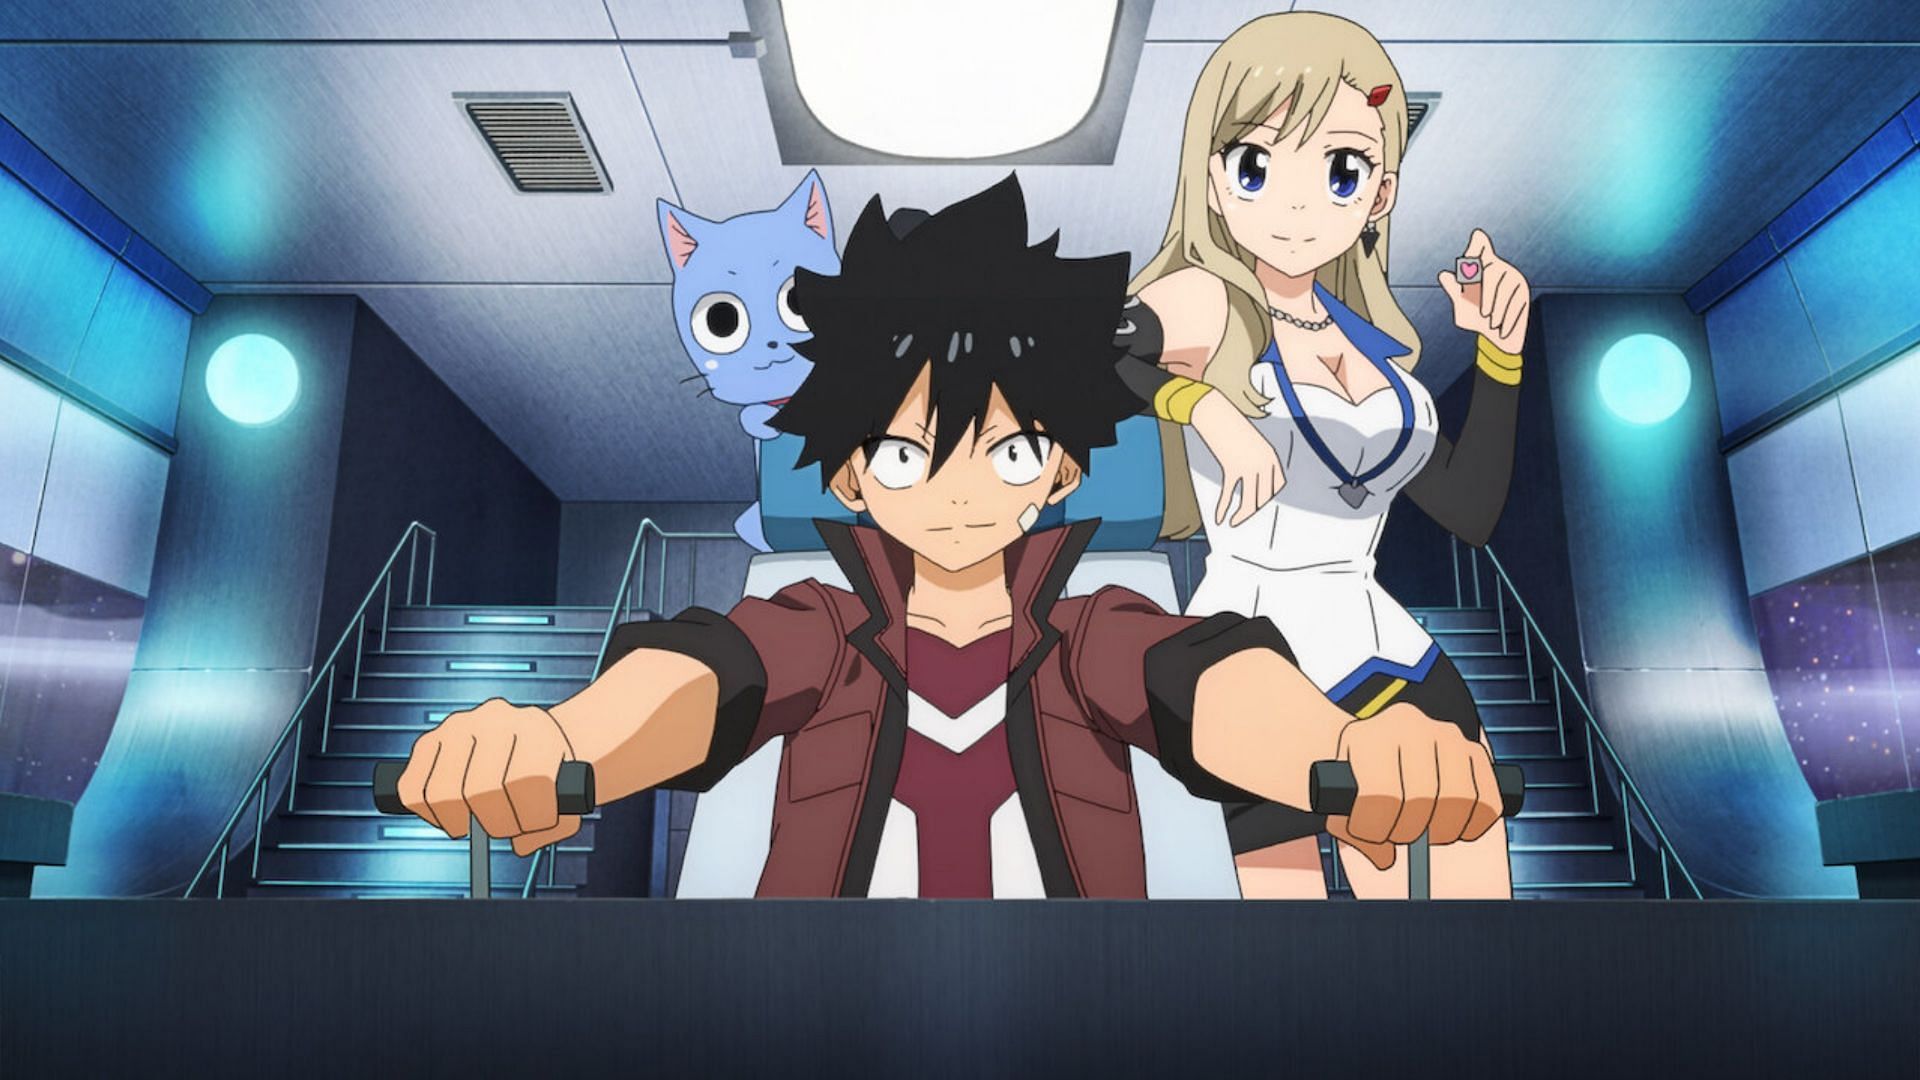 Muse communications to stream Edens Zero season 2 following the licensing controversy (Image via J.C. Staff)